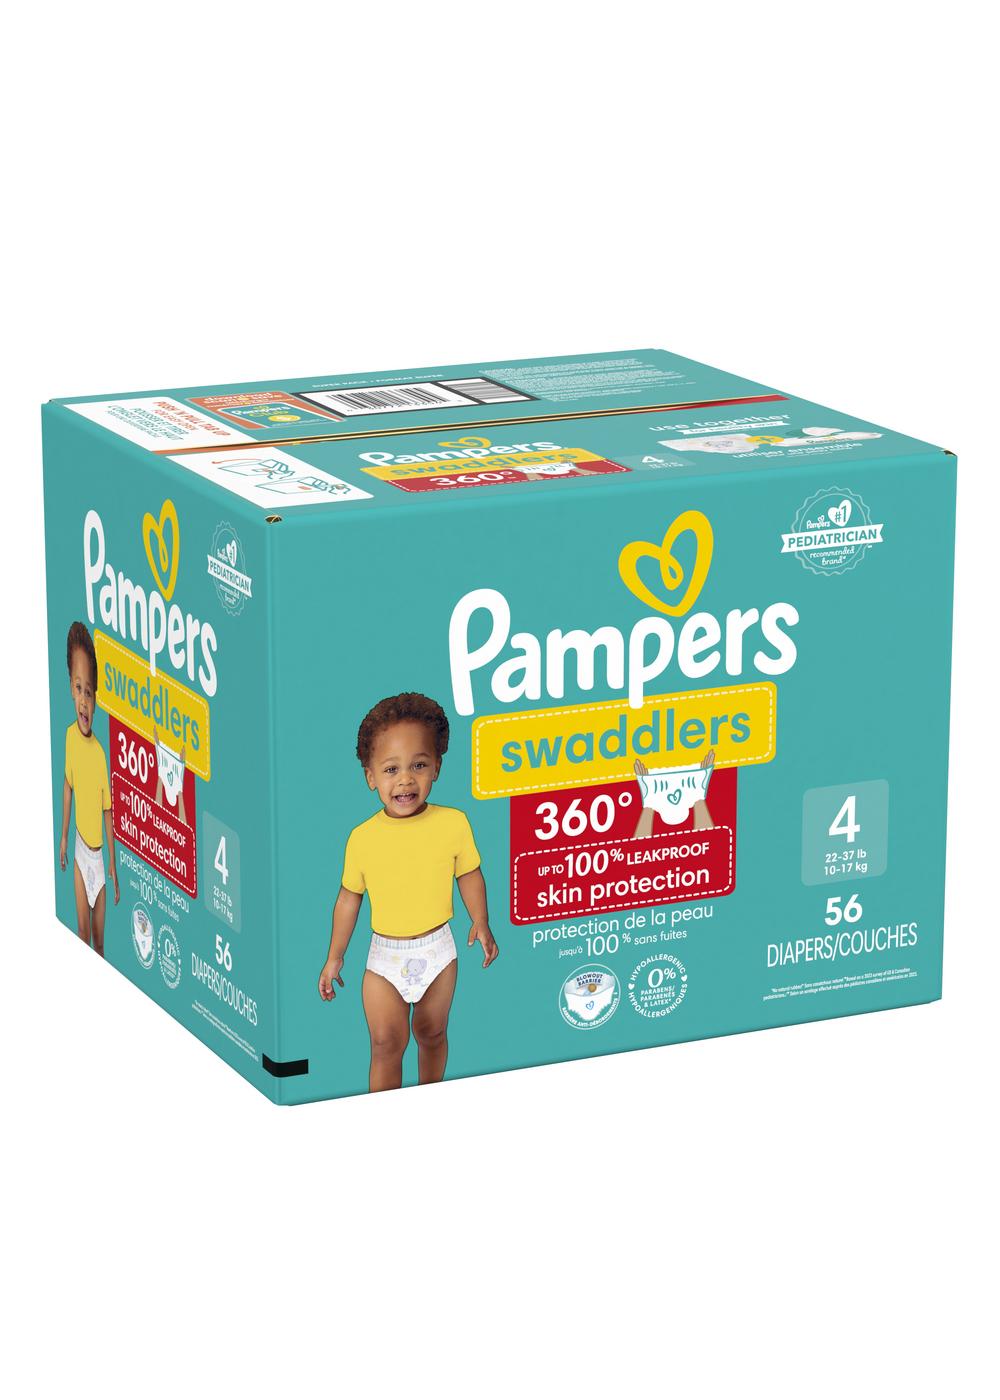 Pampers Swaddlers 360 Diapers - Size 4; image 2 of 3